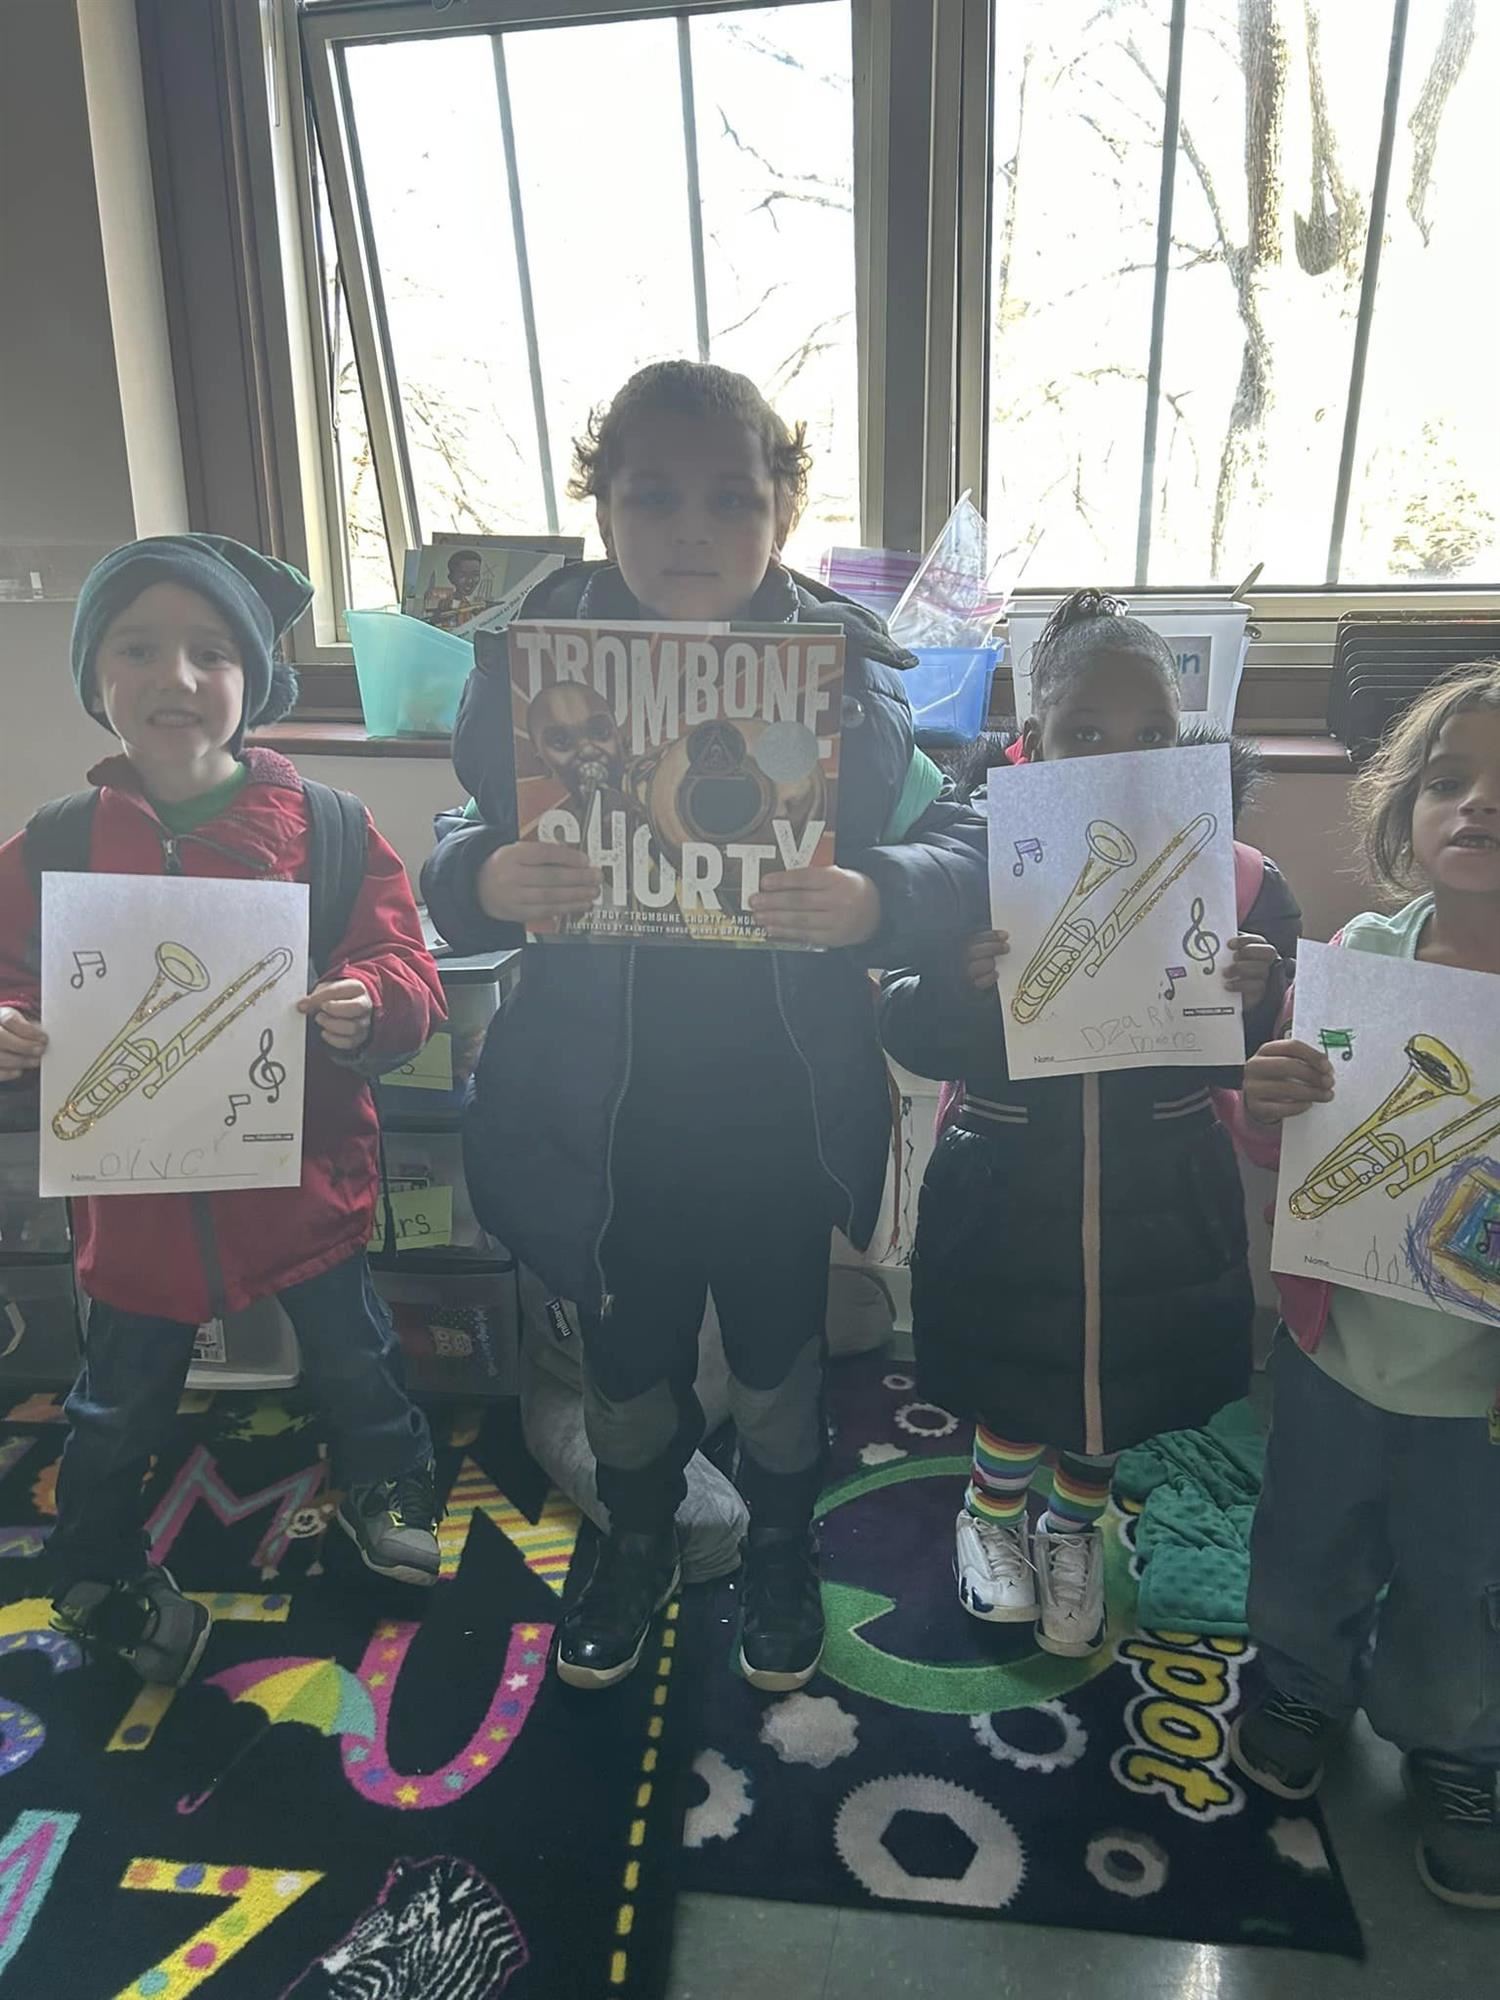 Photo shows four kindergarteners displaying coloring pages of a trombone and also the book "Trombone Shorty."